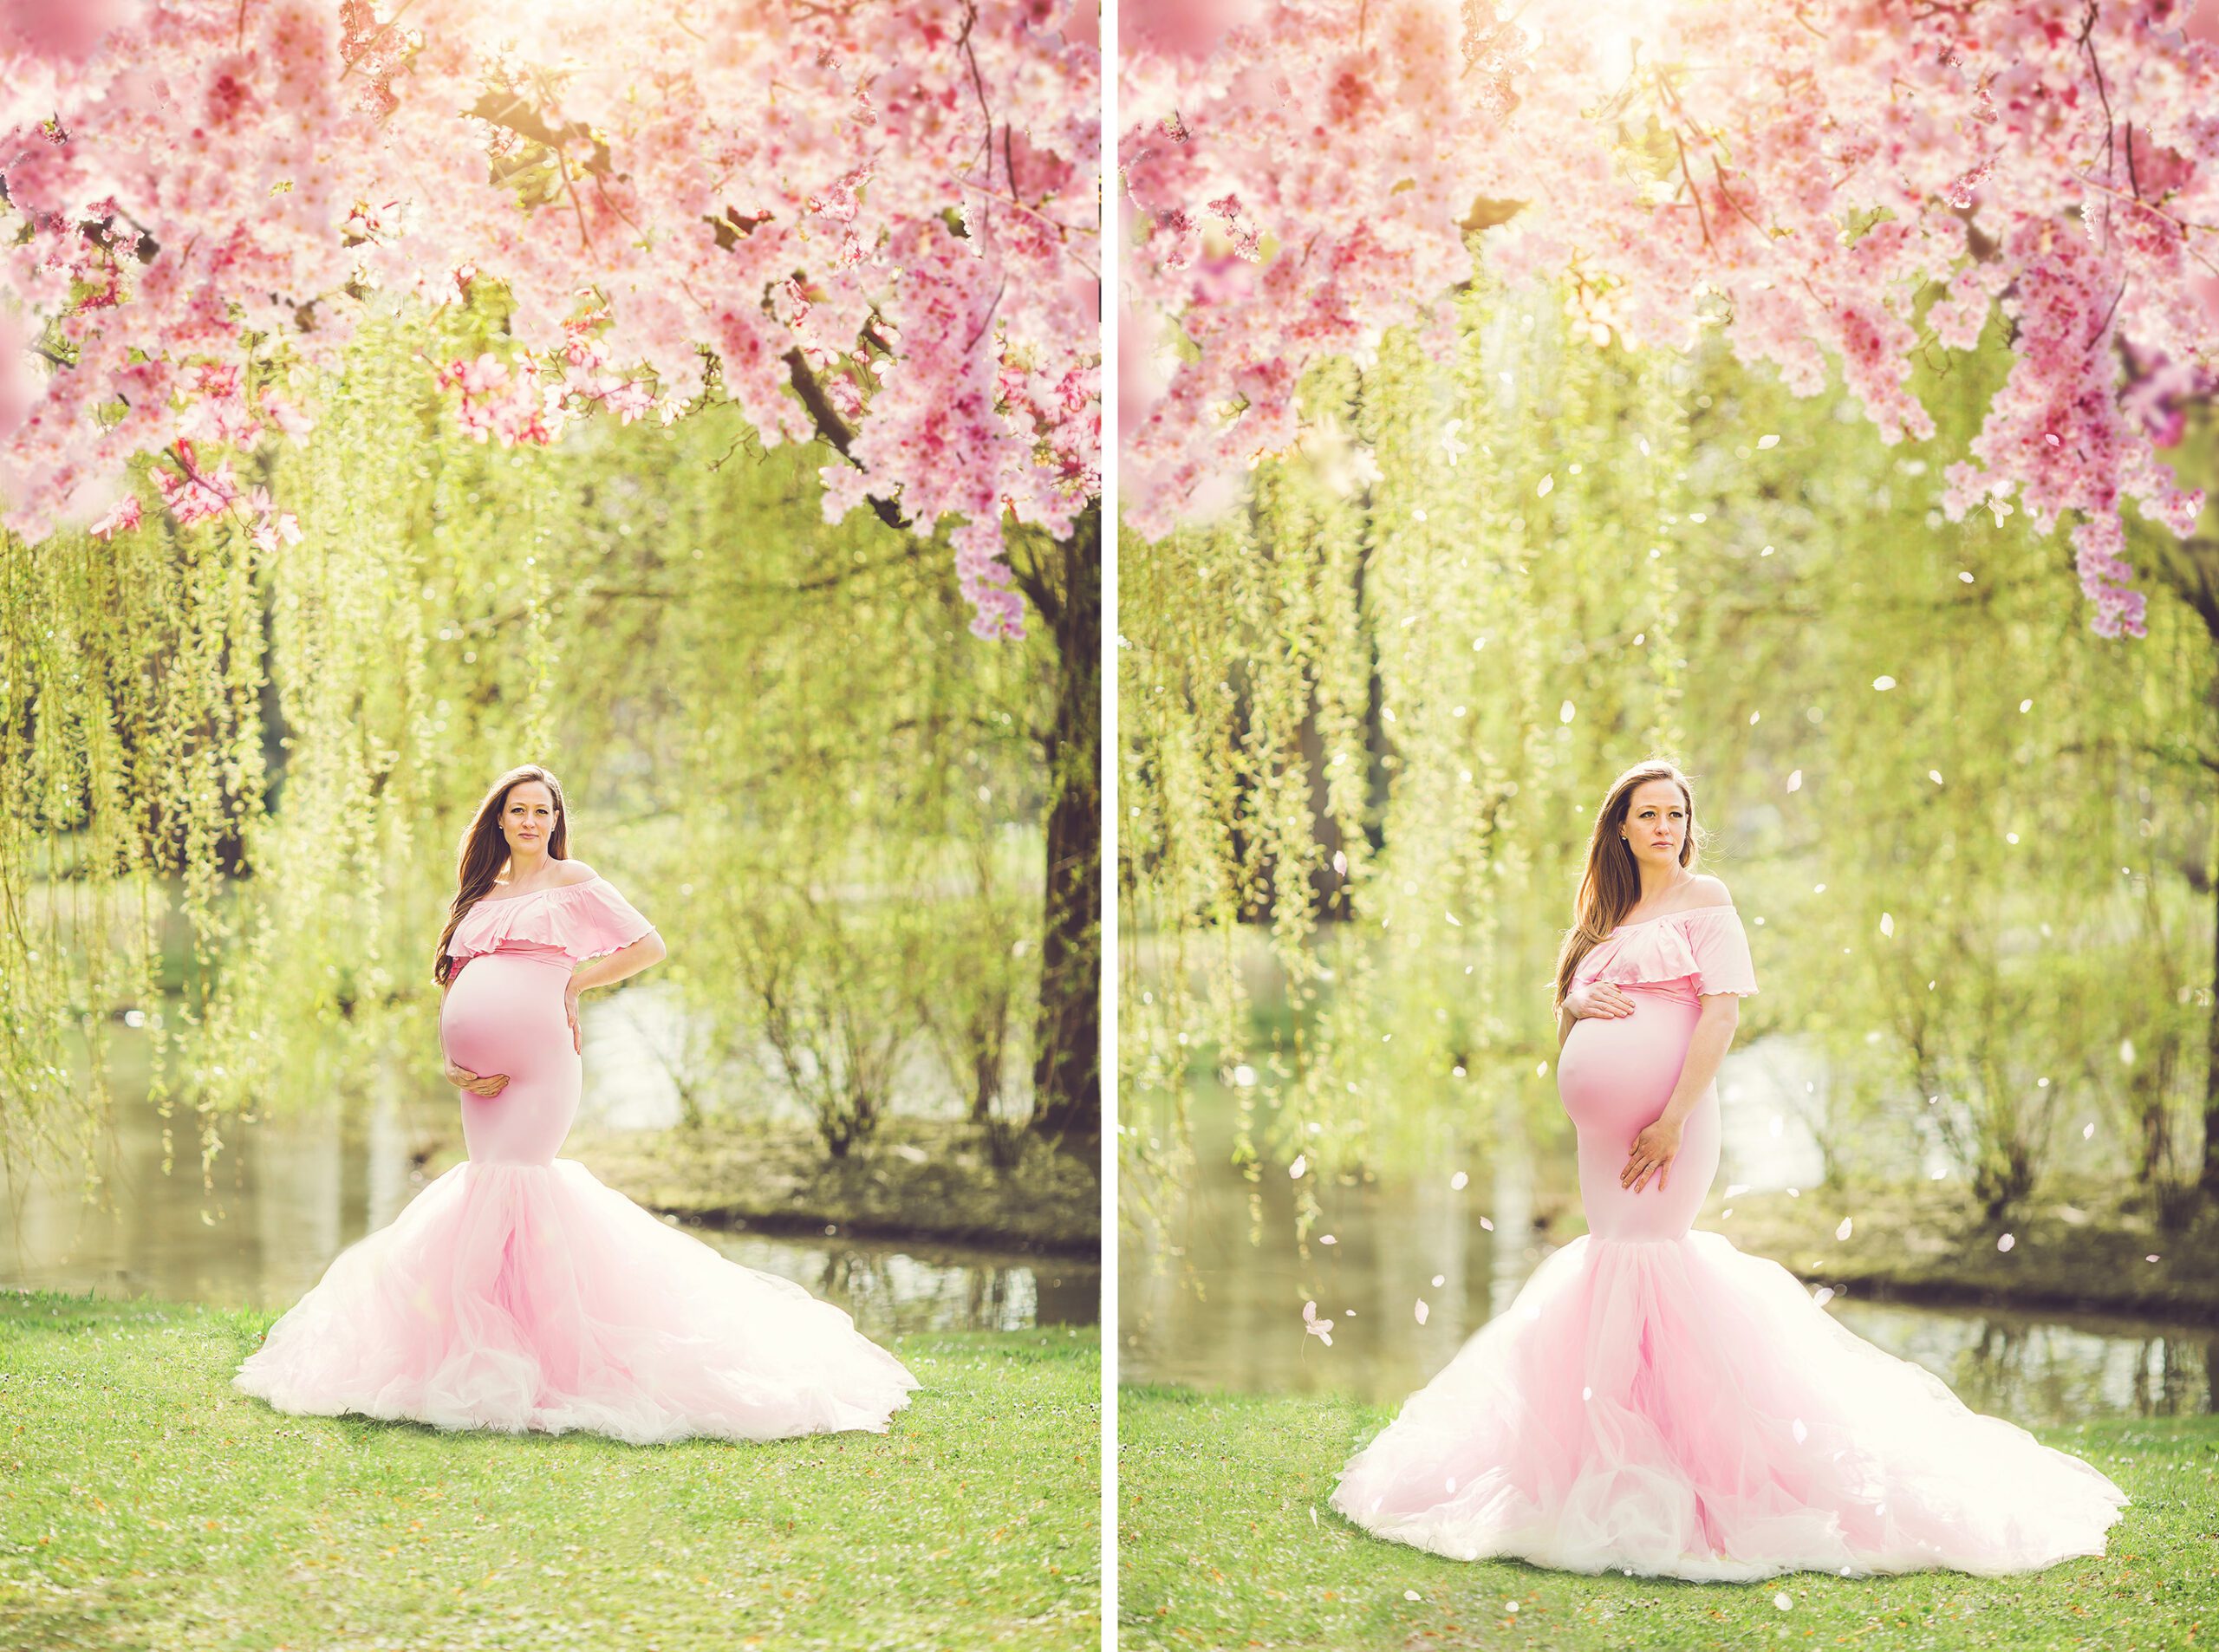 The change of white to pink creates a little fairytale magic during Tabitha's spring maternity session